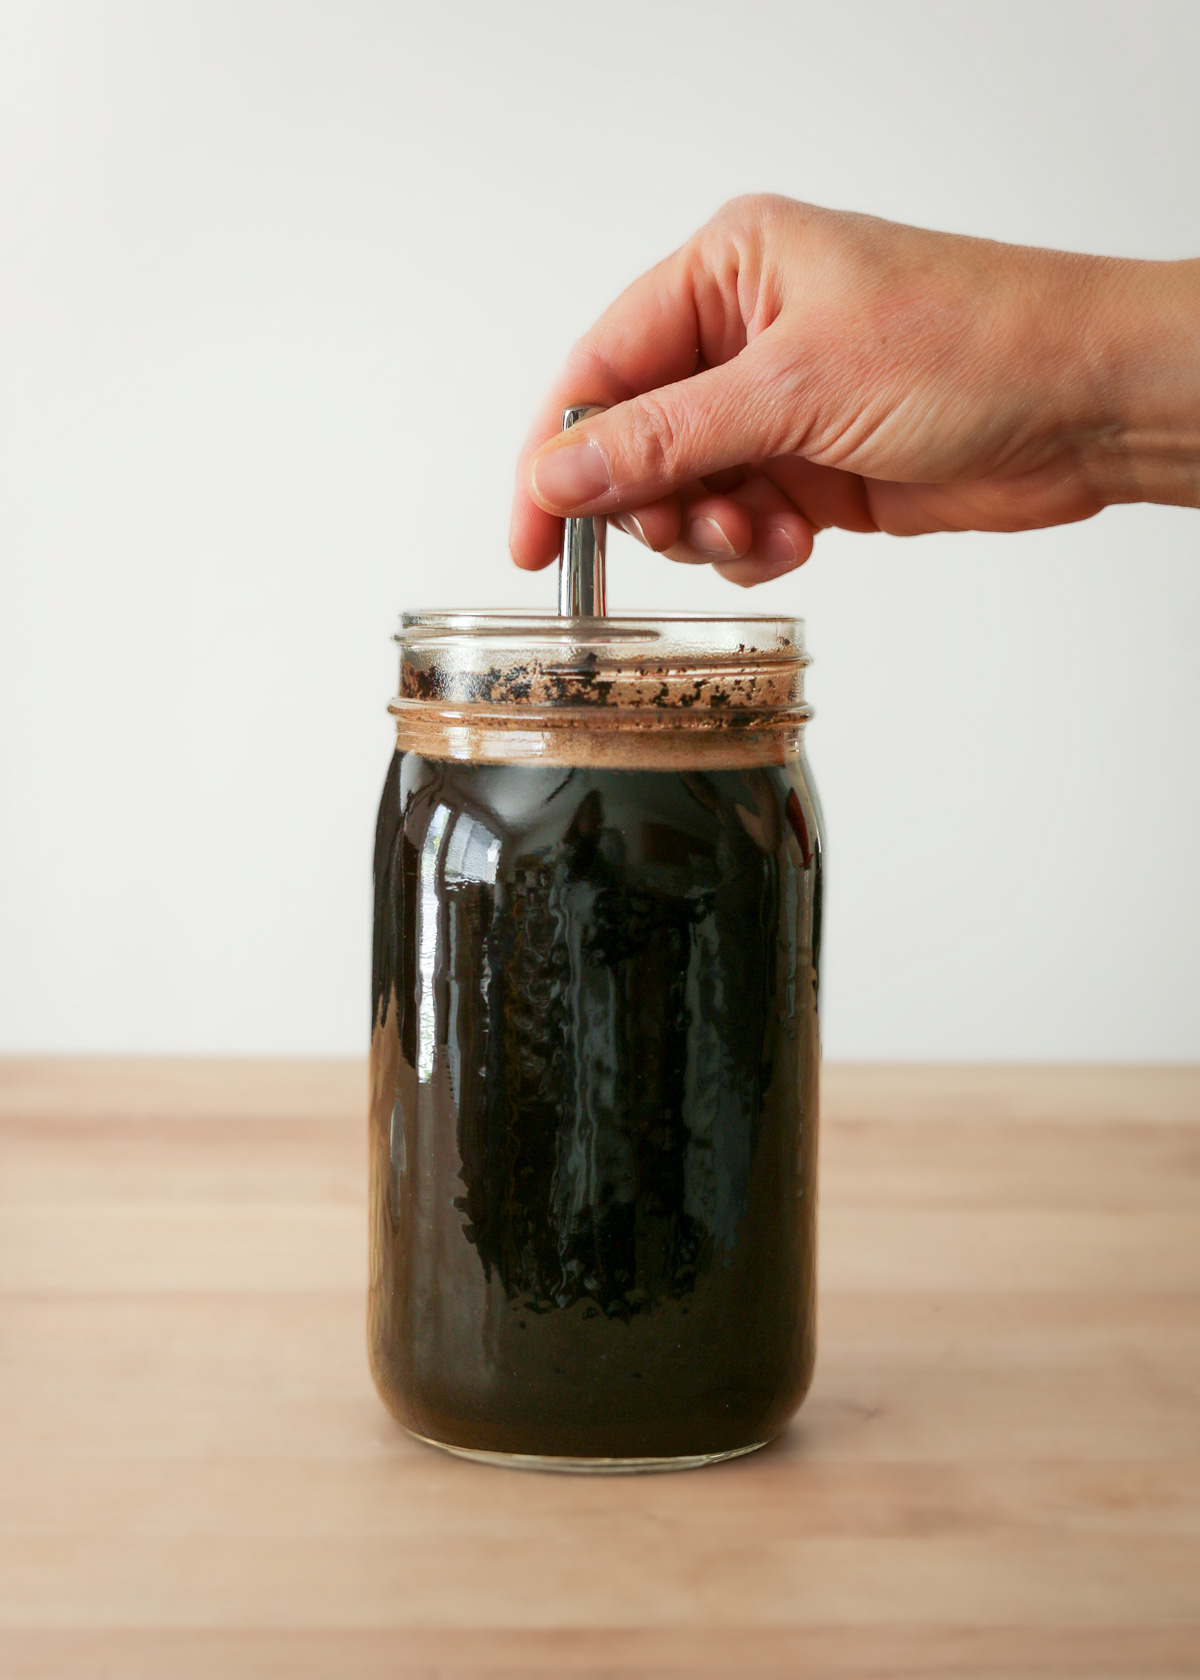 stirring the cold brew and coffee grounds in the jar.